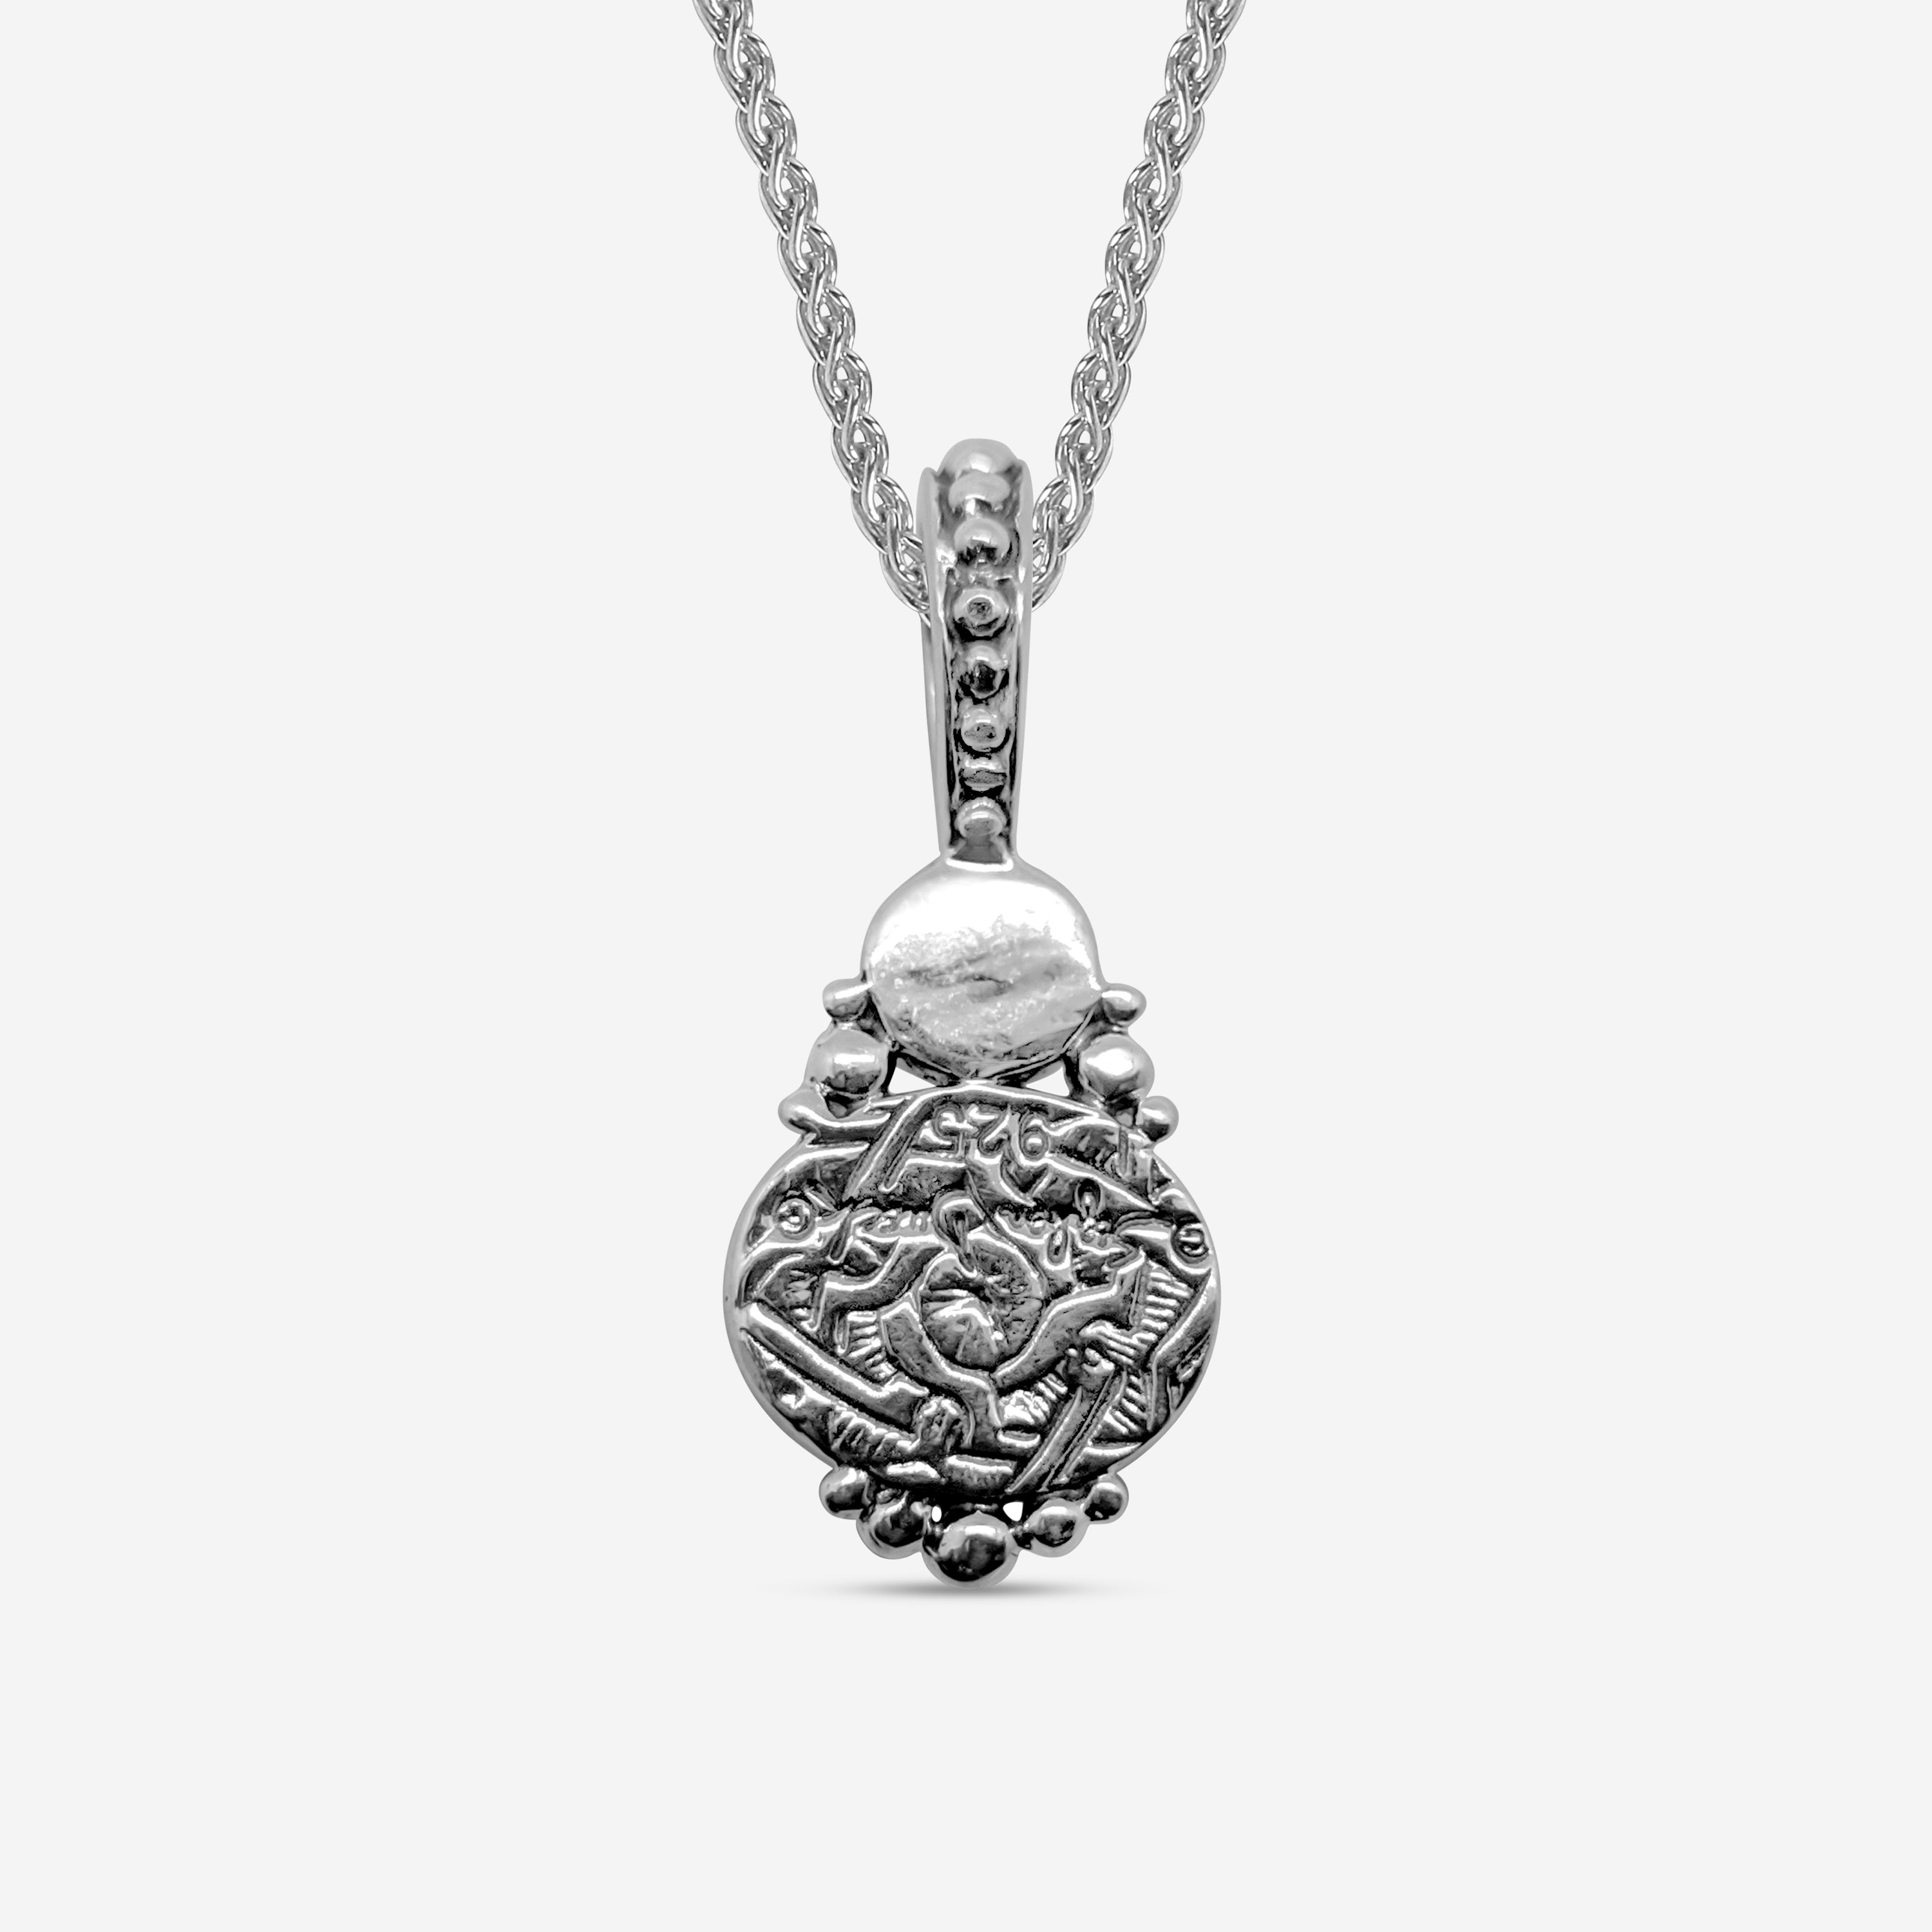 Stephen Dweck Sterling Silver, Pearl and Carved Natural Quartz Pendant SDP-34006